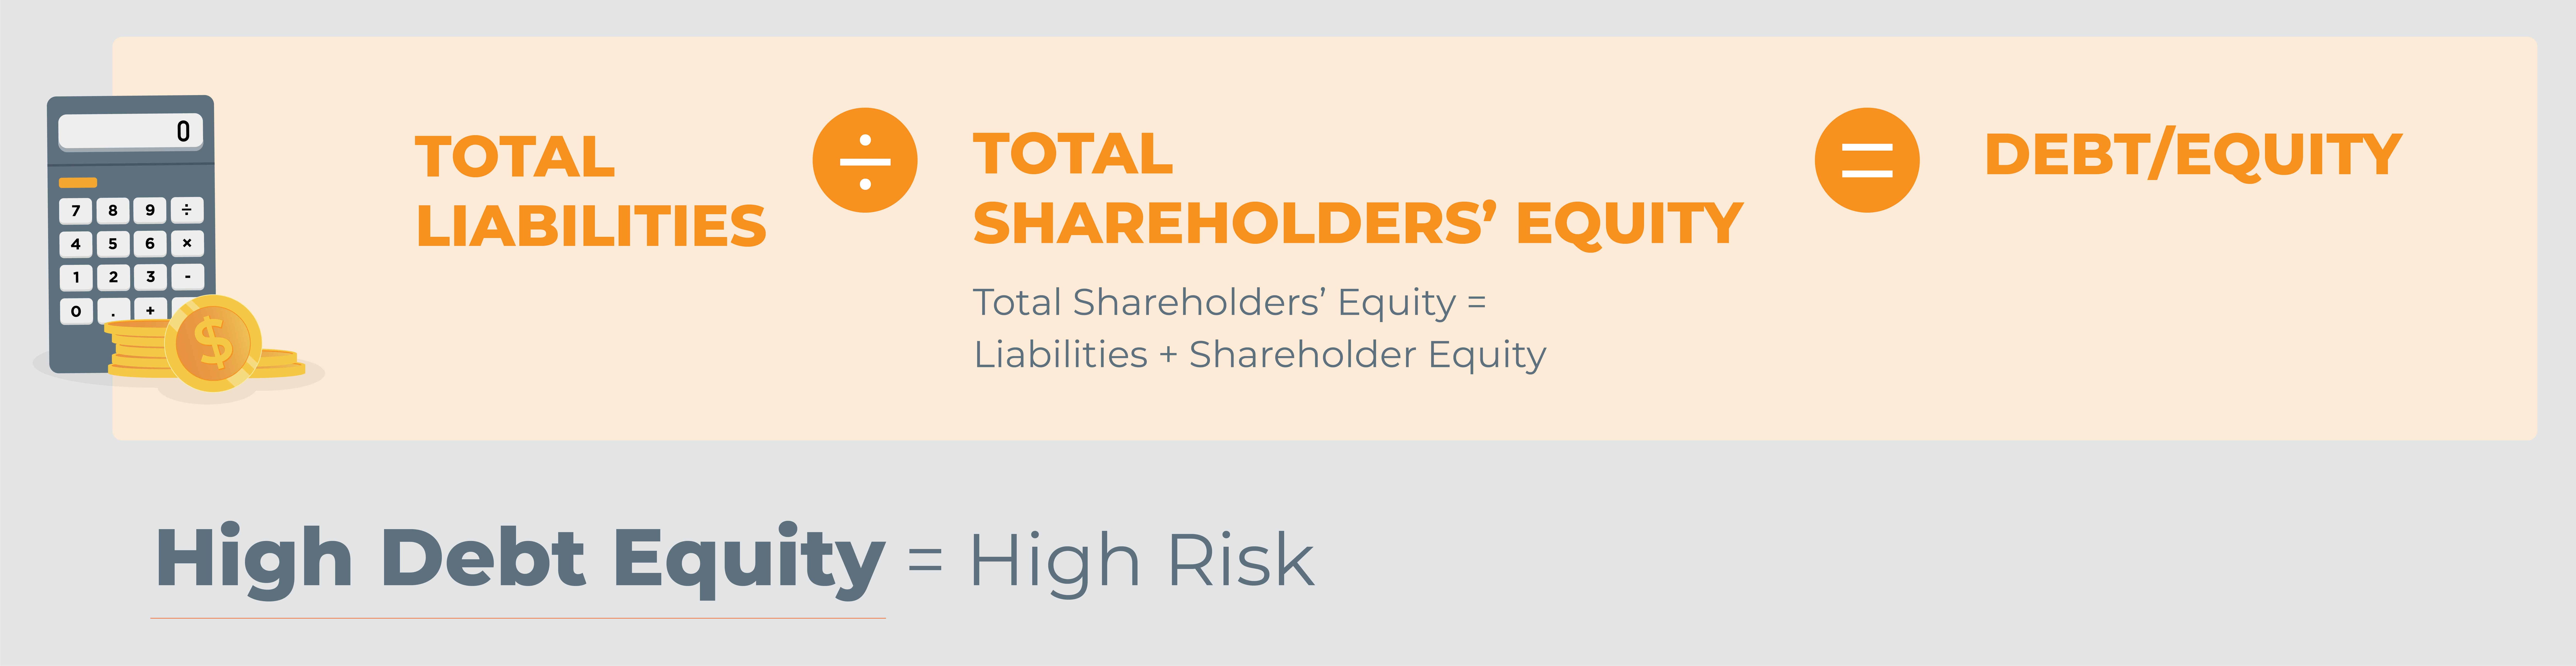 Debt-to-Equity ratio (total liabilities / total shareholders' equity)